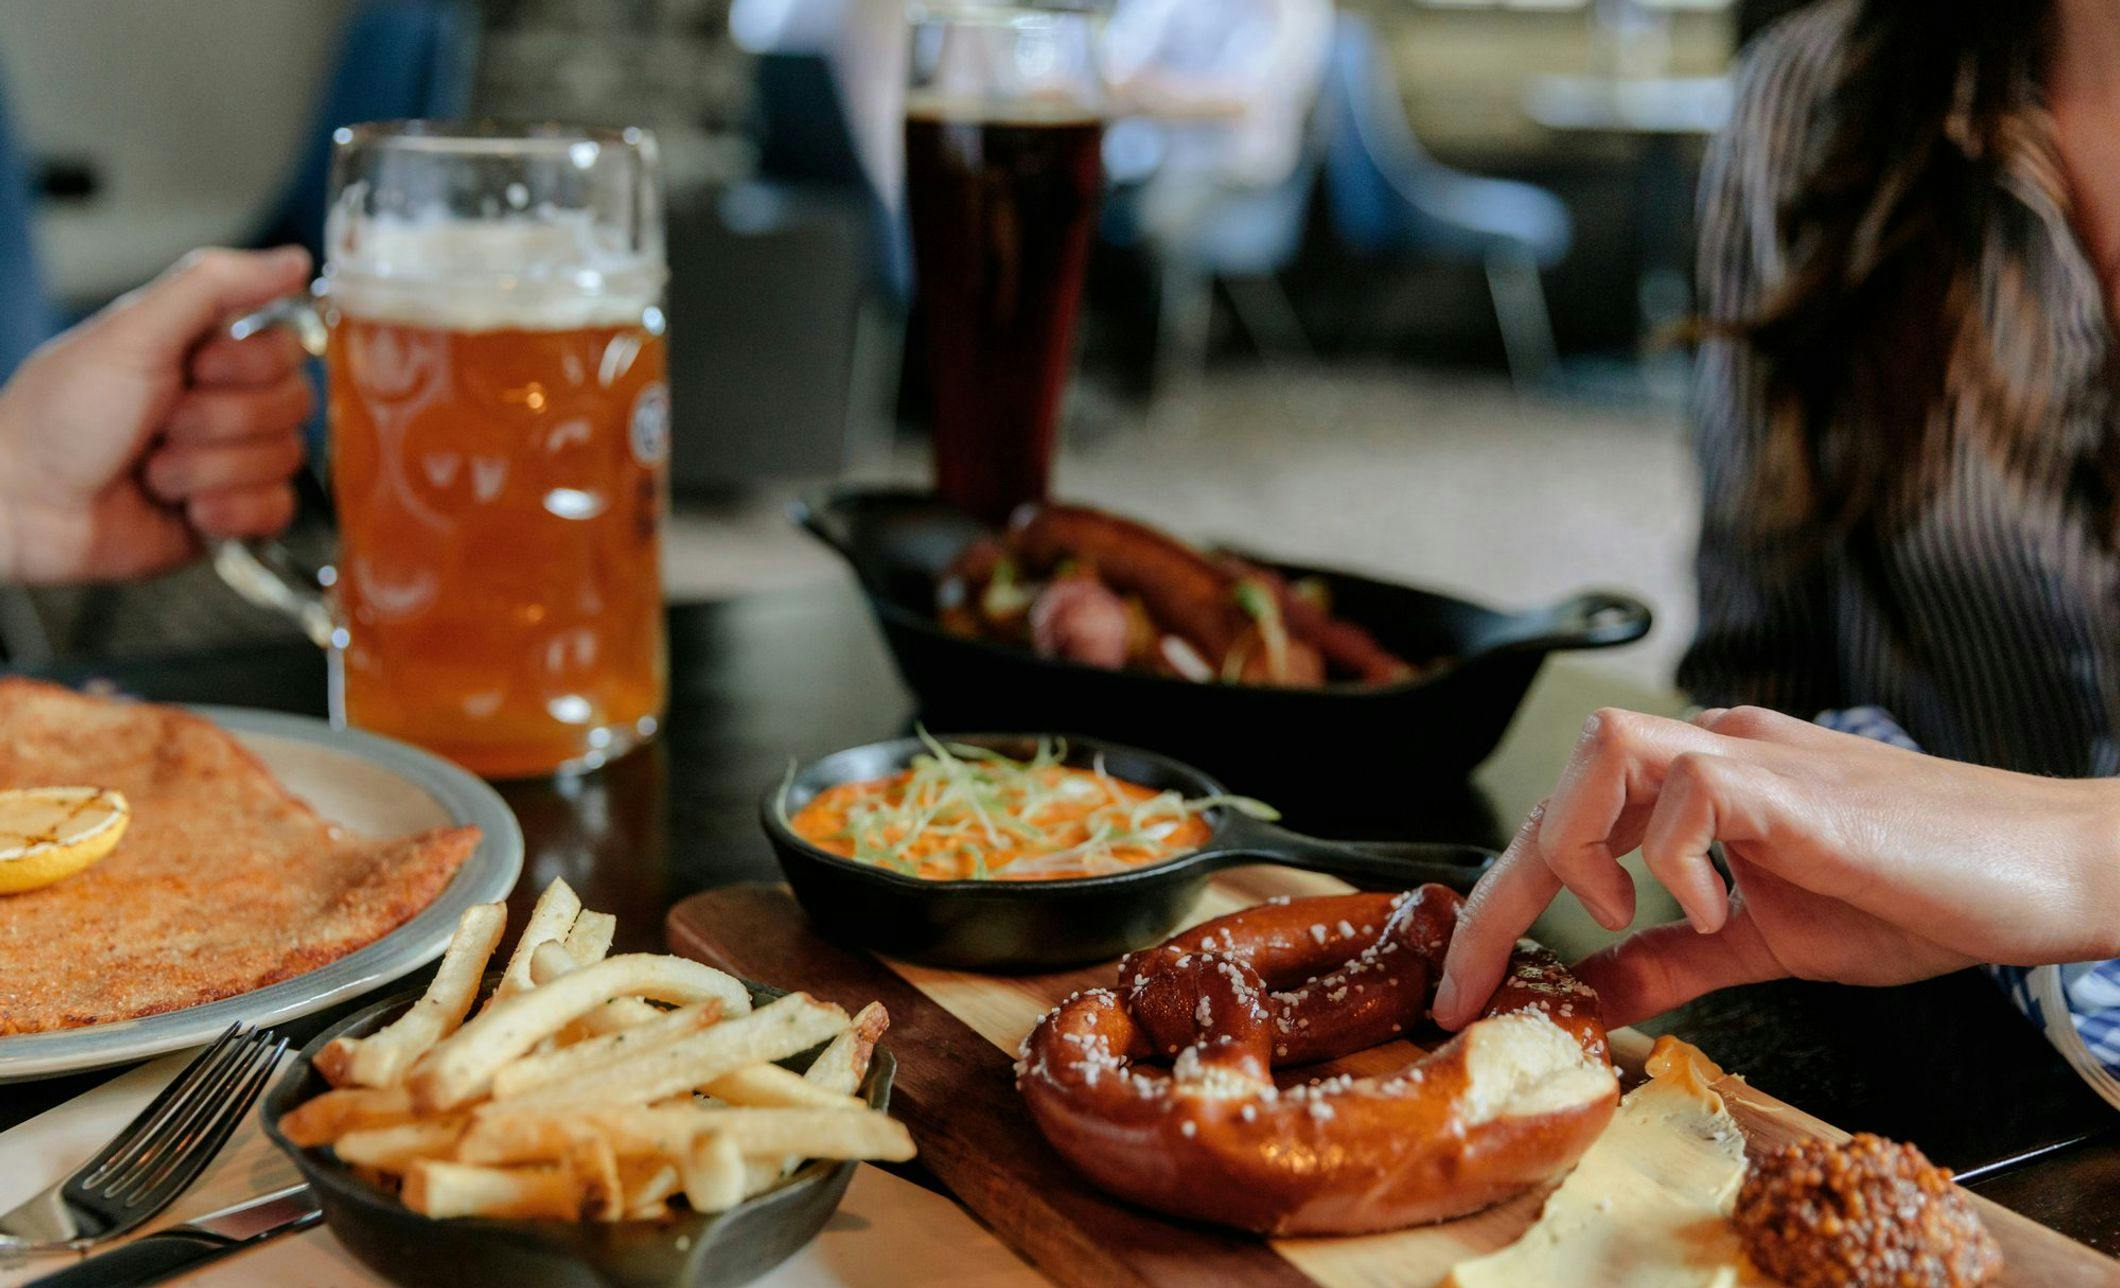 A table features beer and plated food including warm pretzels, fries, and appetizers